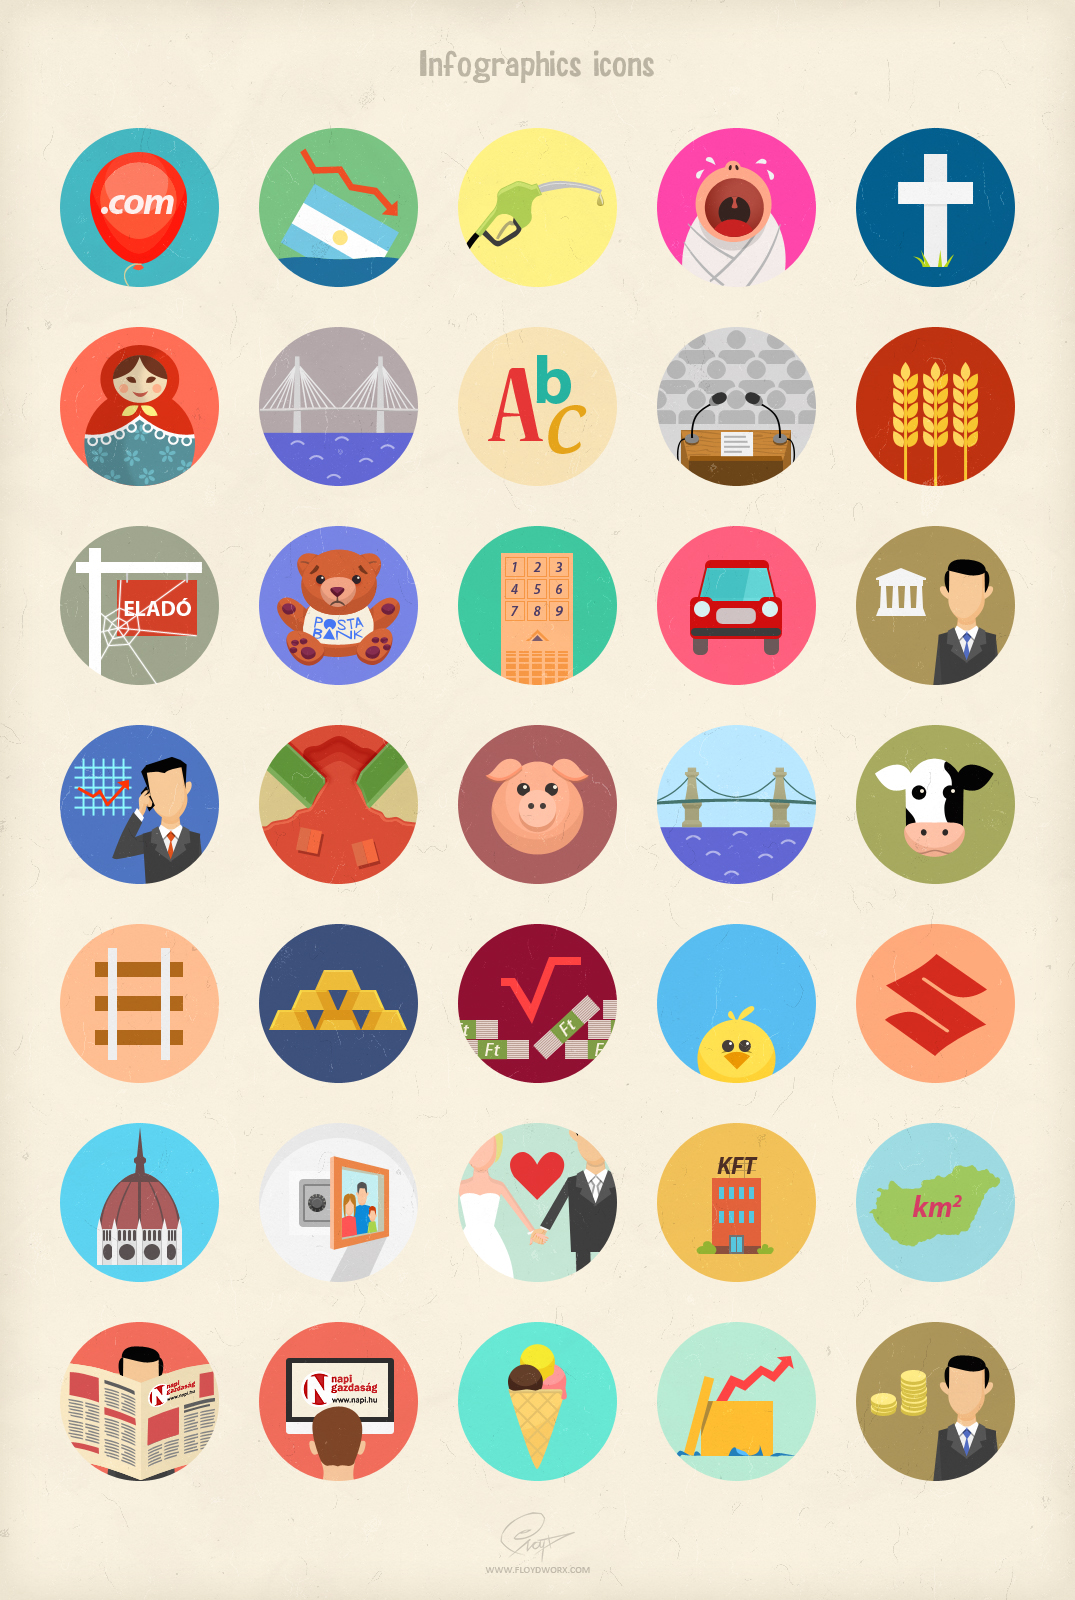 Infographic with medical icons Vector | Free Download